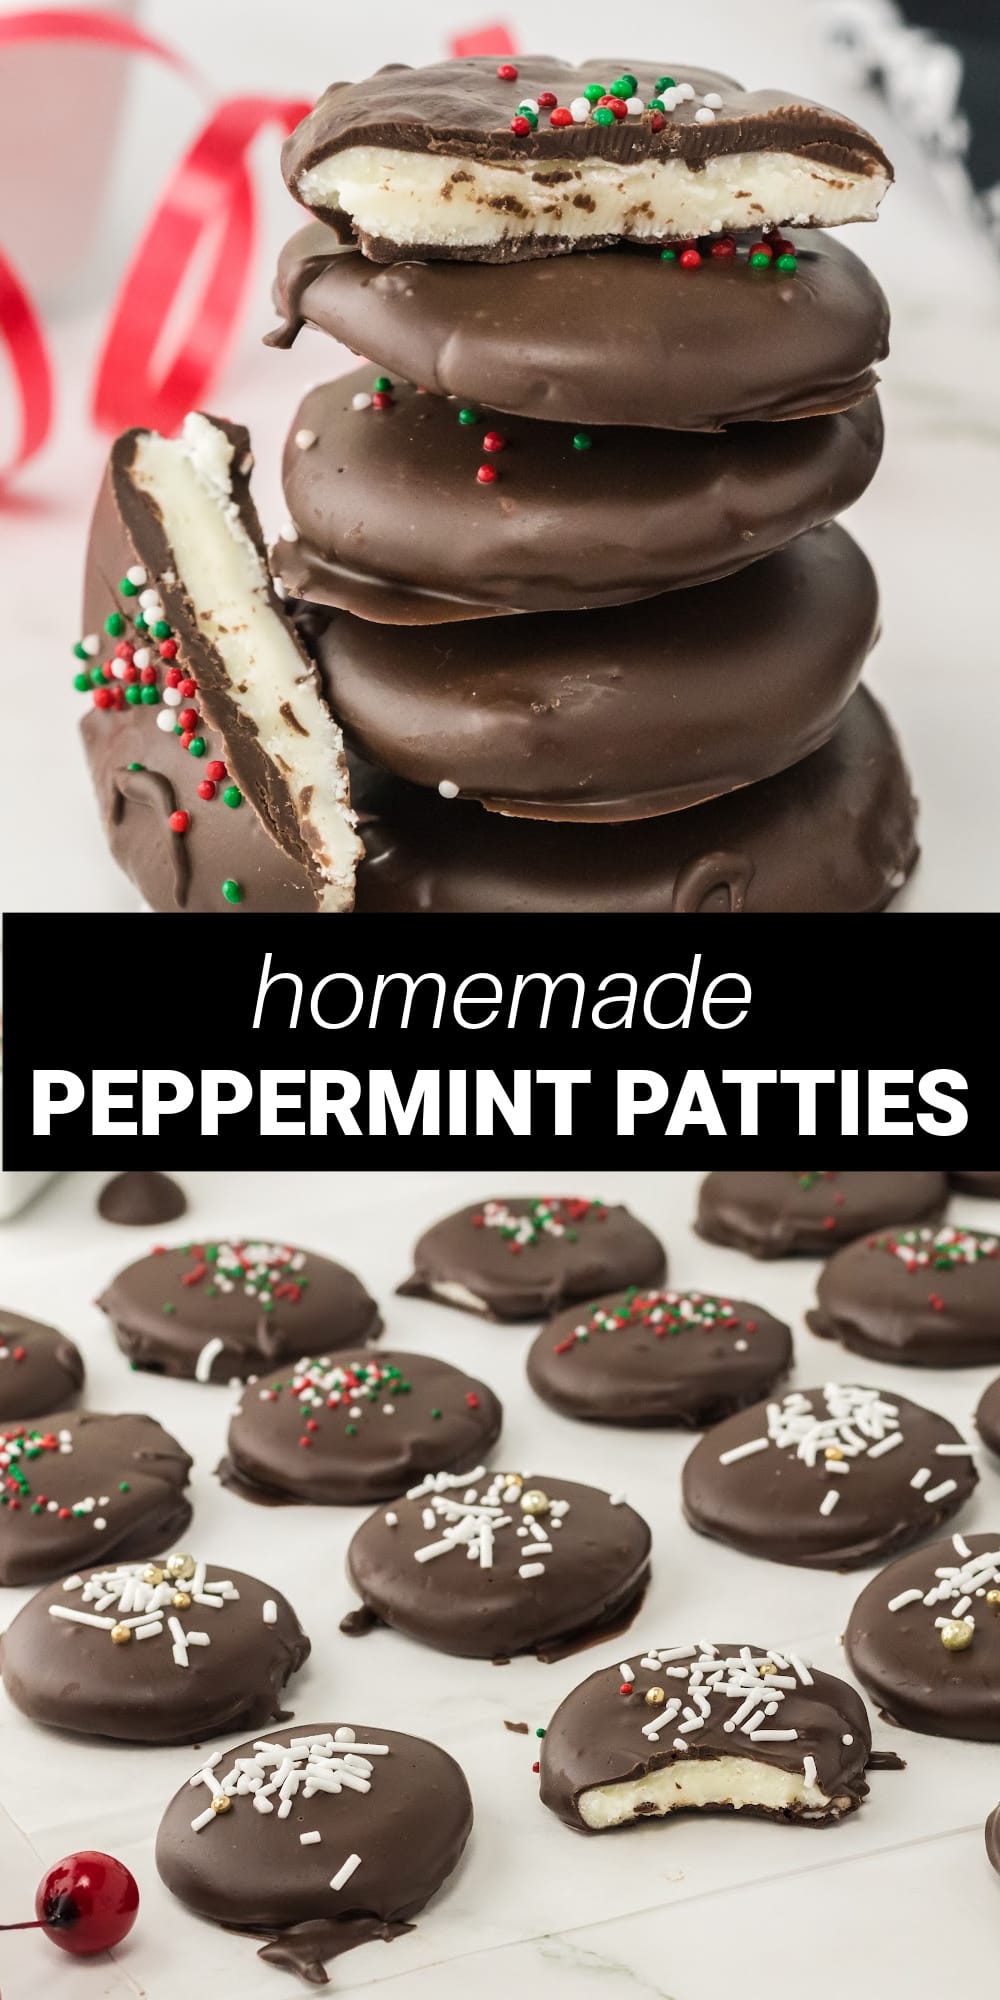 Festive Homemade Peppermint Patties have a delicious, cool and creamy peppermint center, a rich dark chocolate coating and are finished with colorful holiday sprinkles. These minty mini treats are a super easy, no-bake treat that are perfect for parties, gift giving or simple holiday snacks!